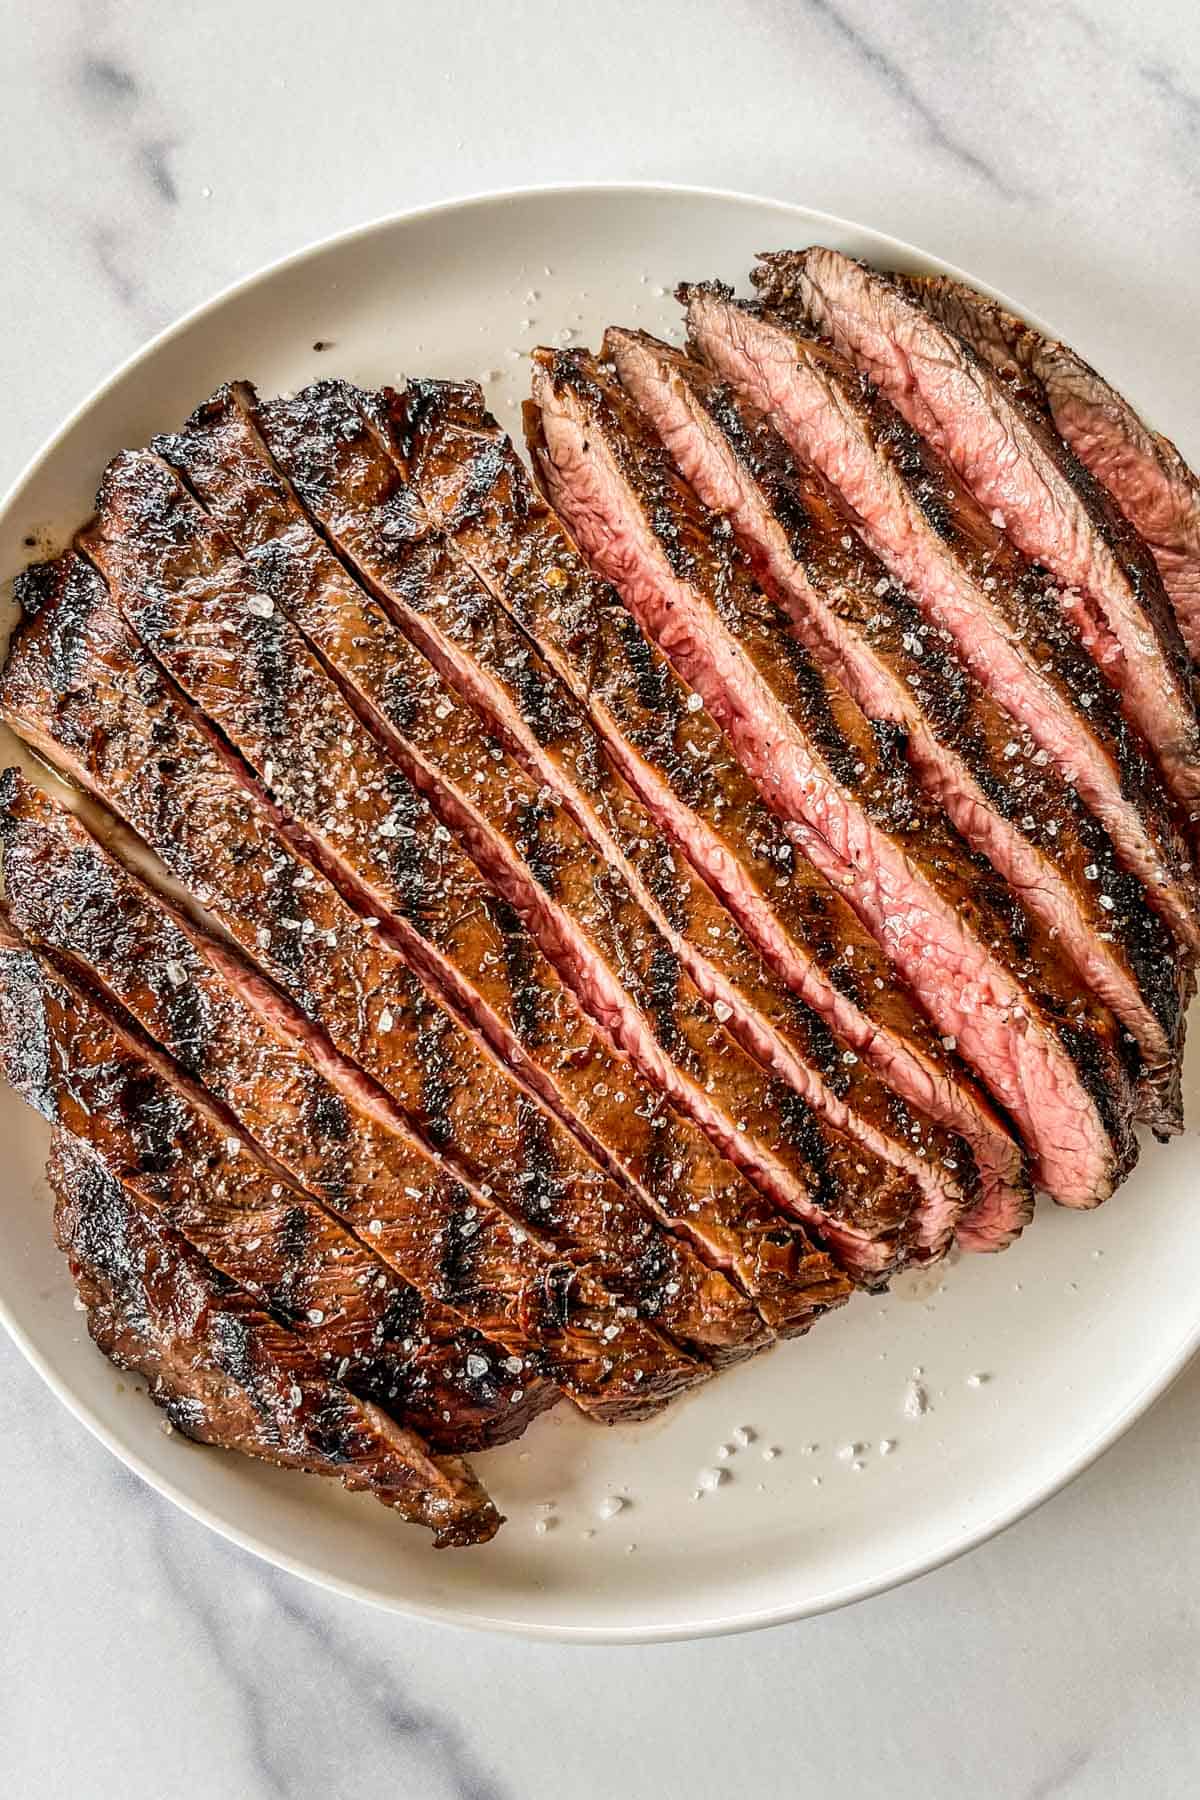 A grilled flank steak on a white plate.